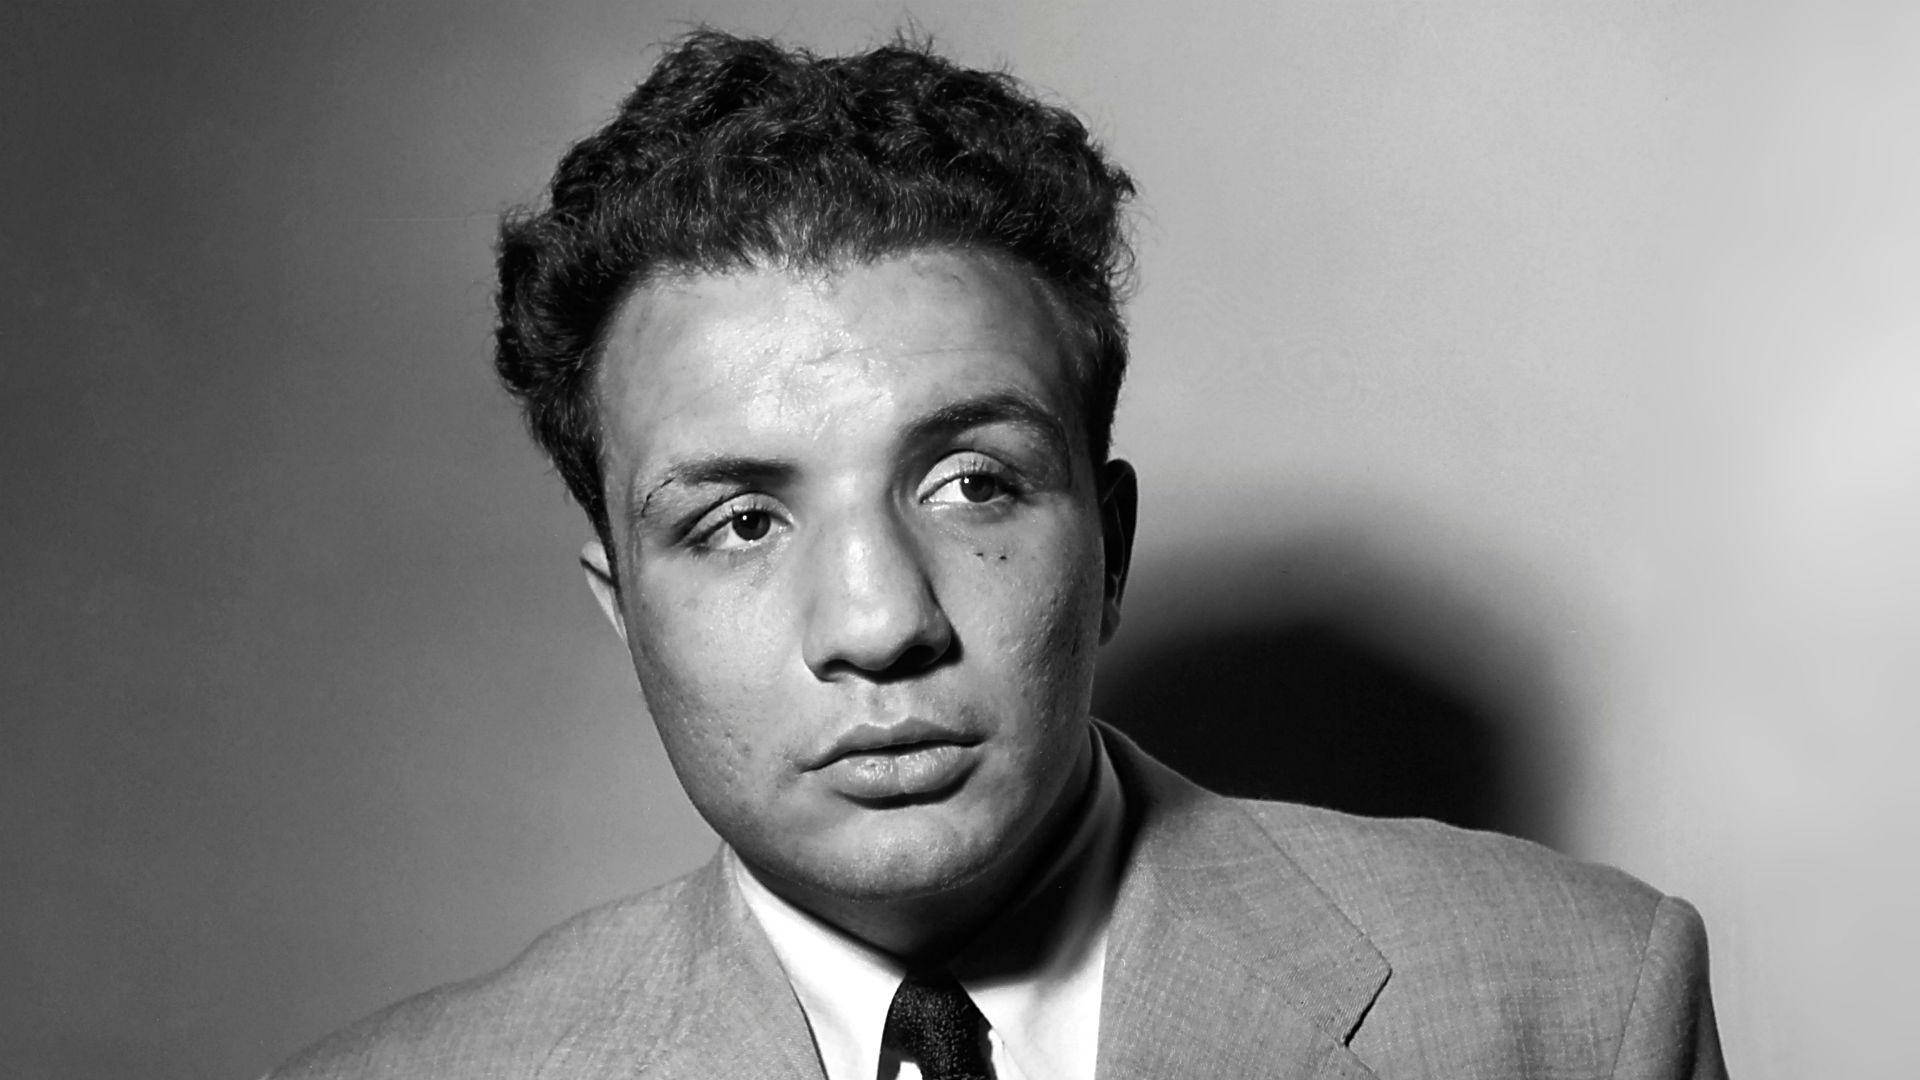 Jake Lamotta In A Suit And Tie Outfit Wallpaper